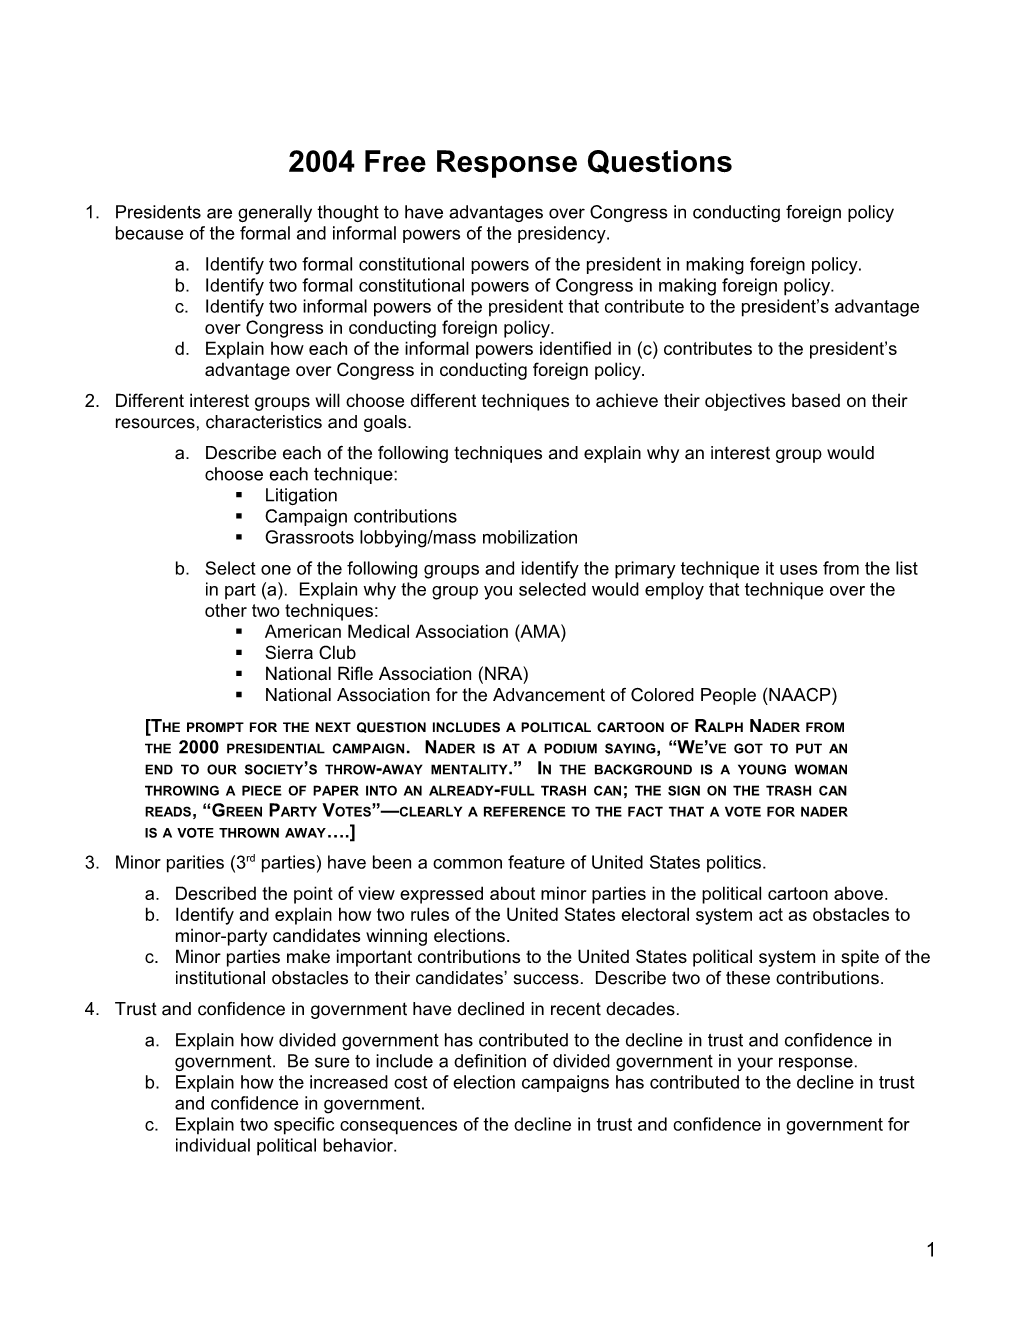 2000 Free Response Questions